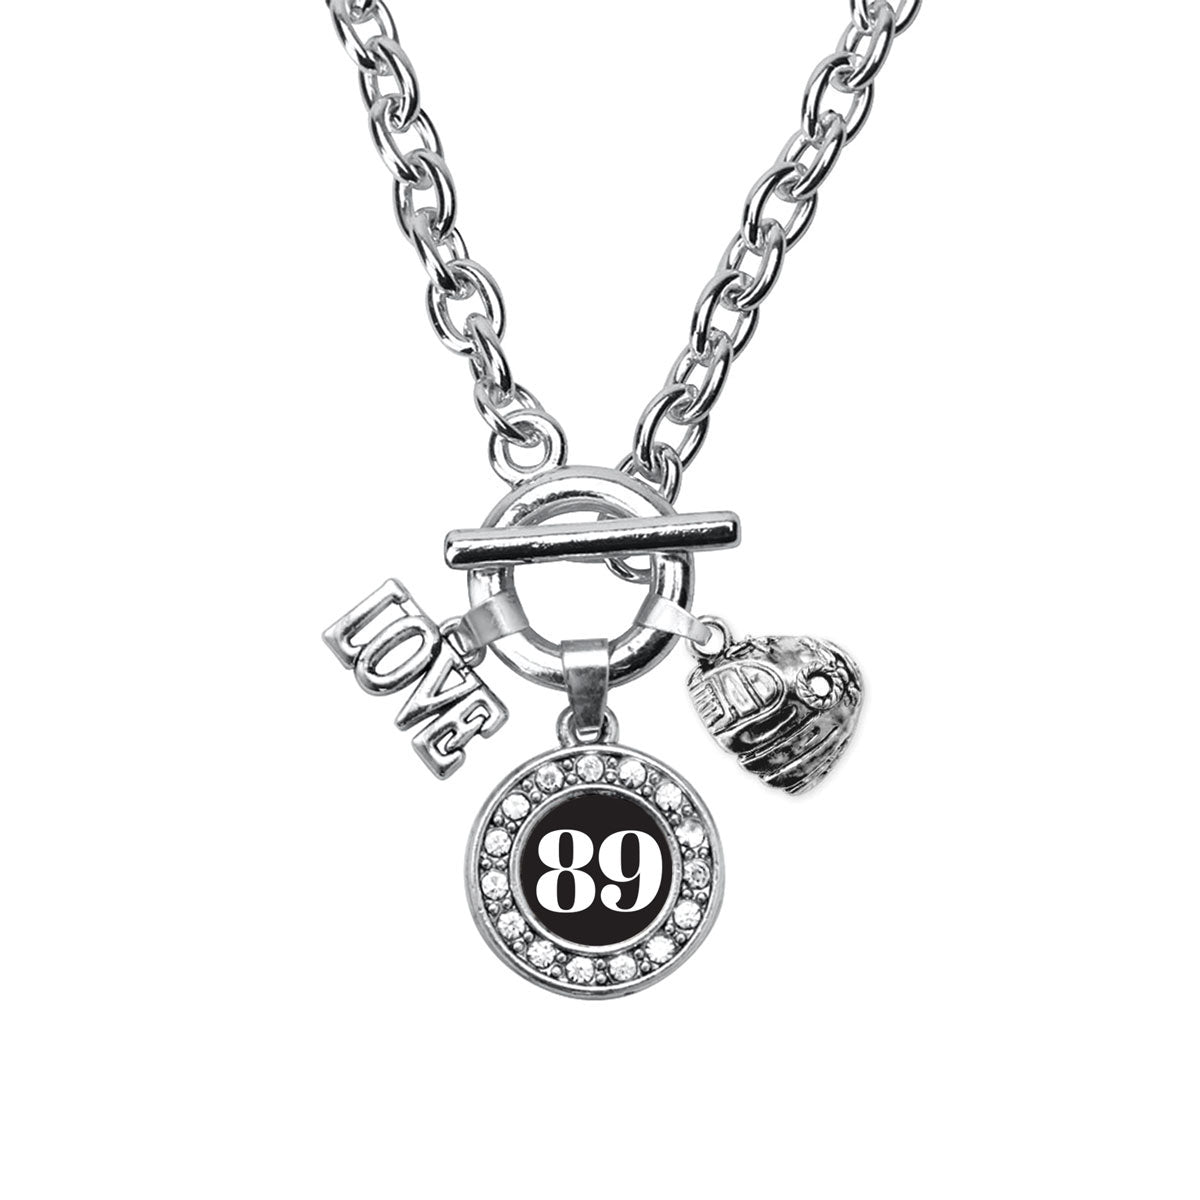 Silver Baseball Glove - Sports Number 89 Circle Charm Toggle Necklace